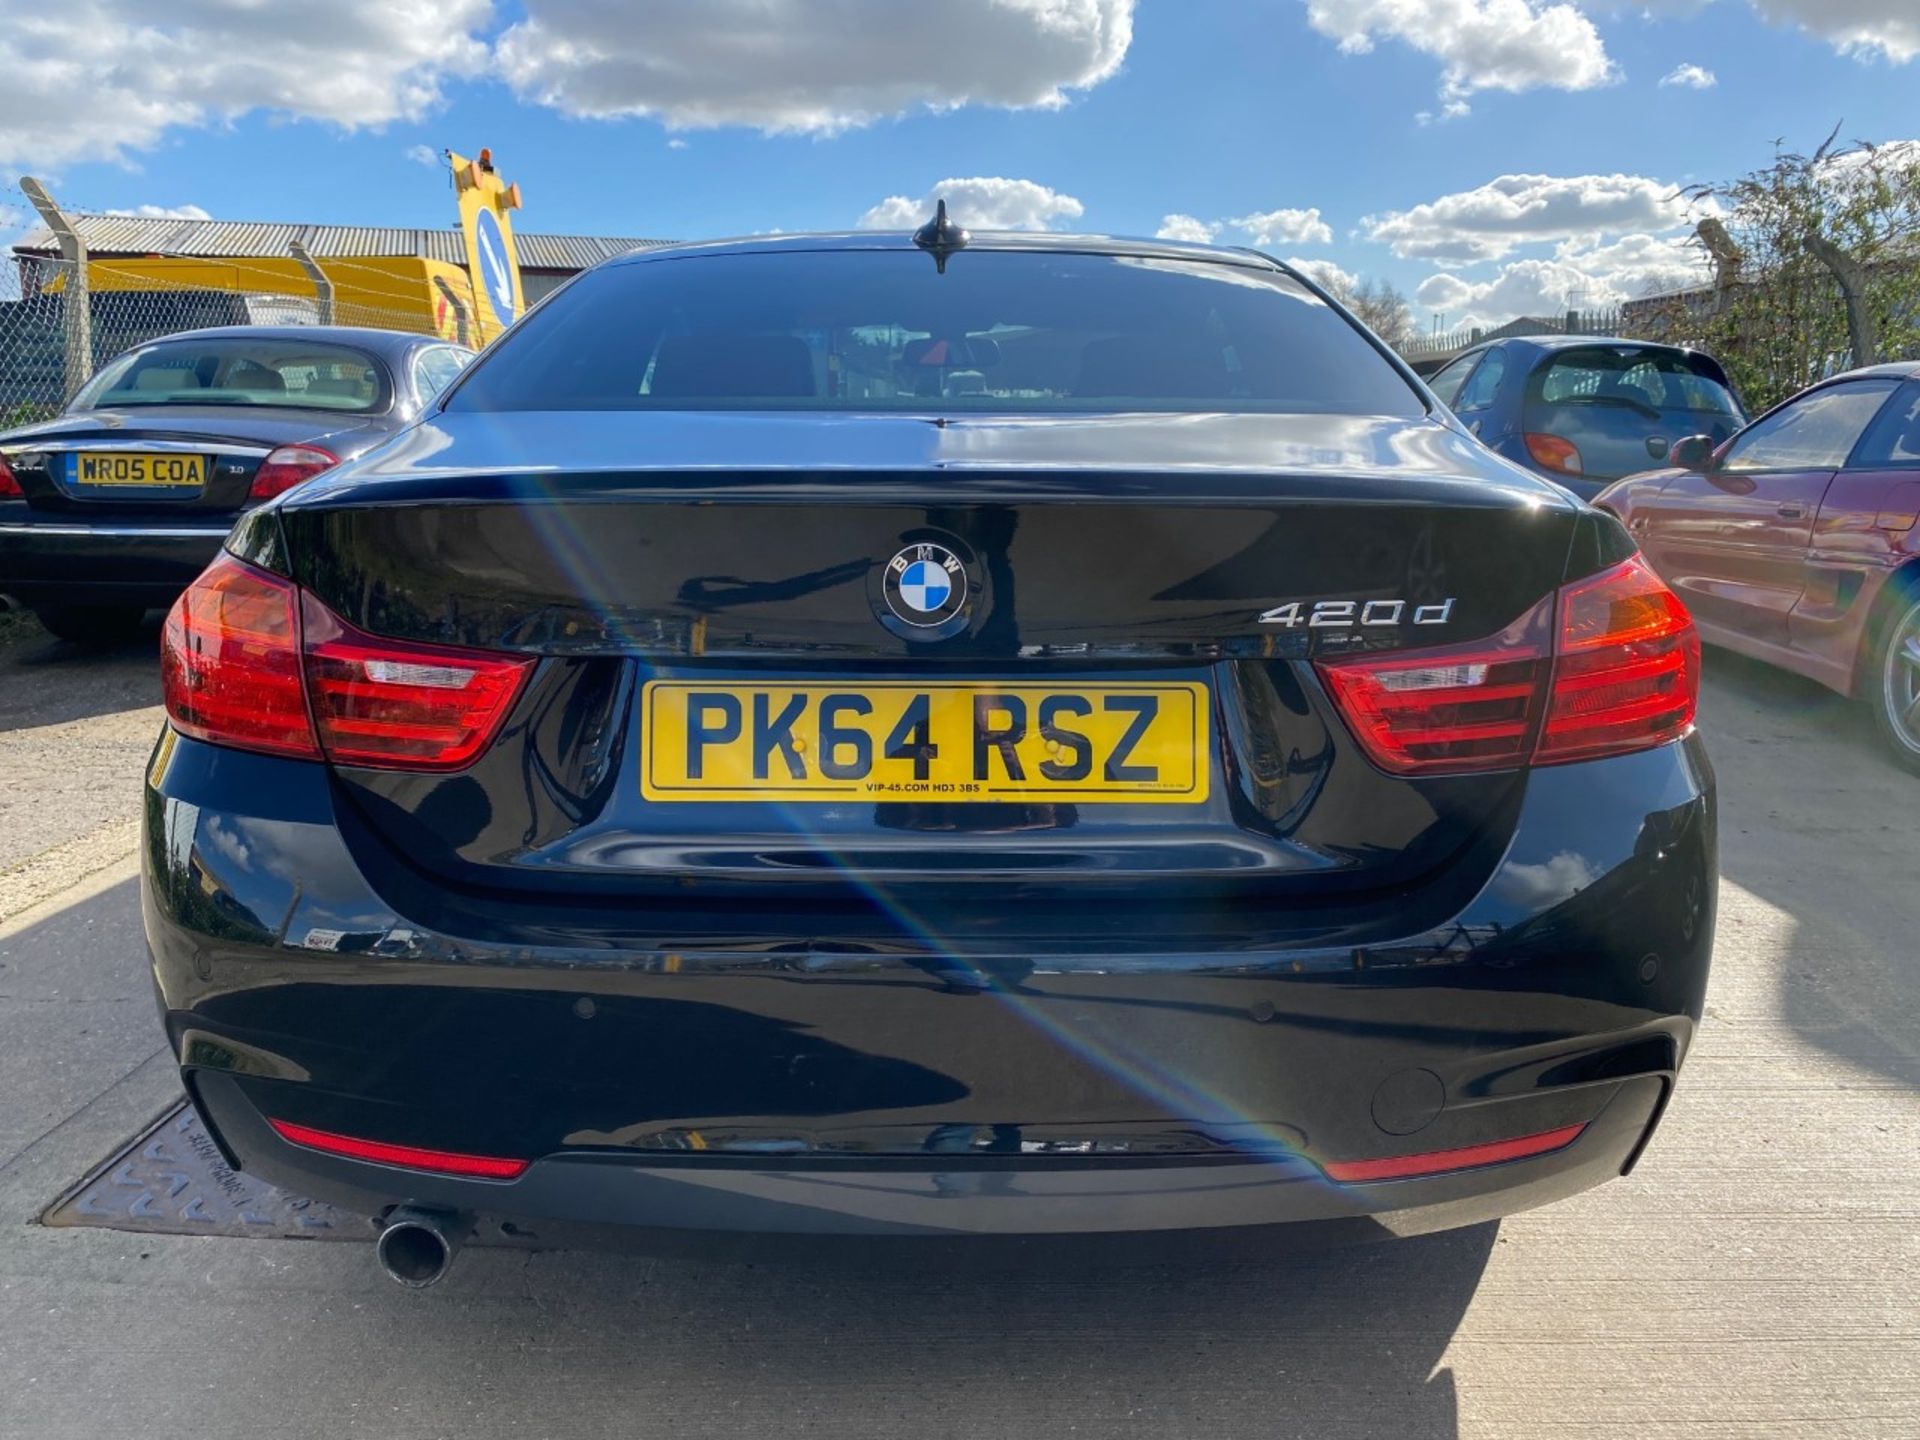 64 14 BMW 420D M Sport Coupe - Image 11 of 42